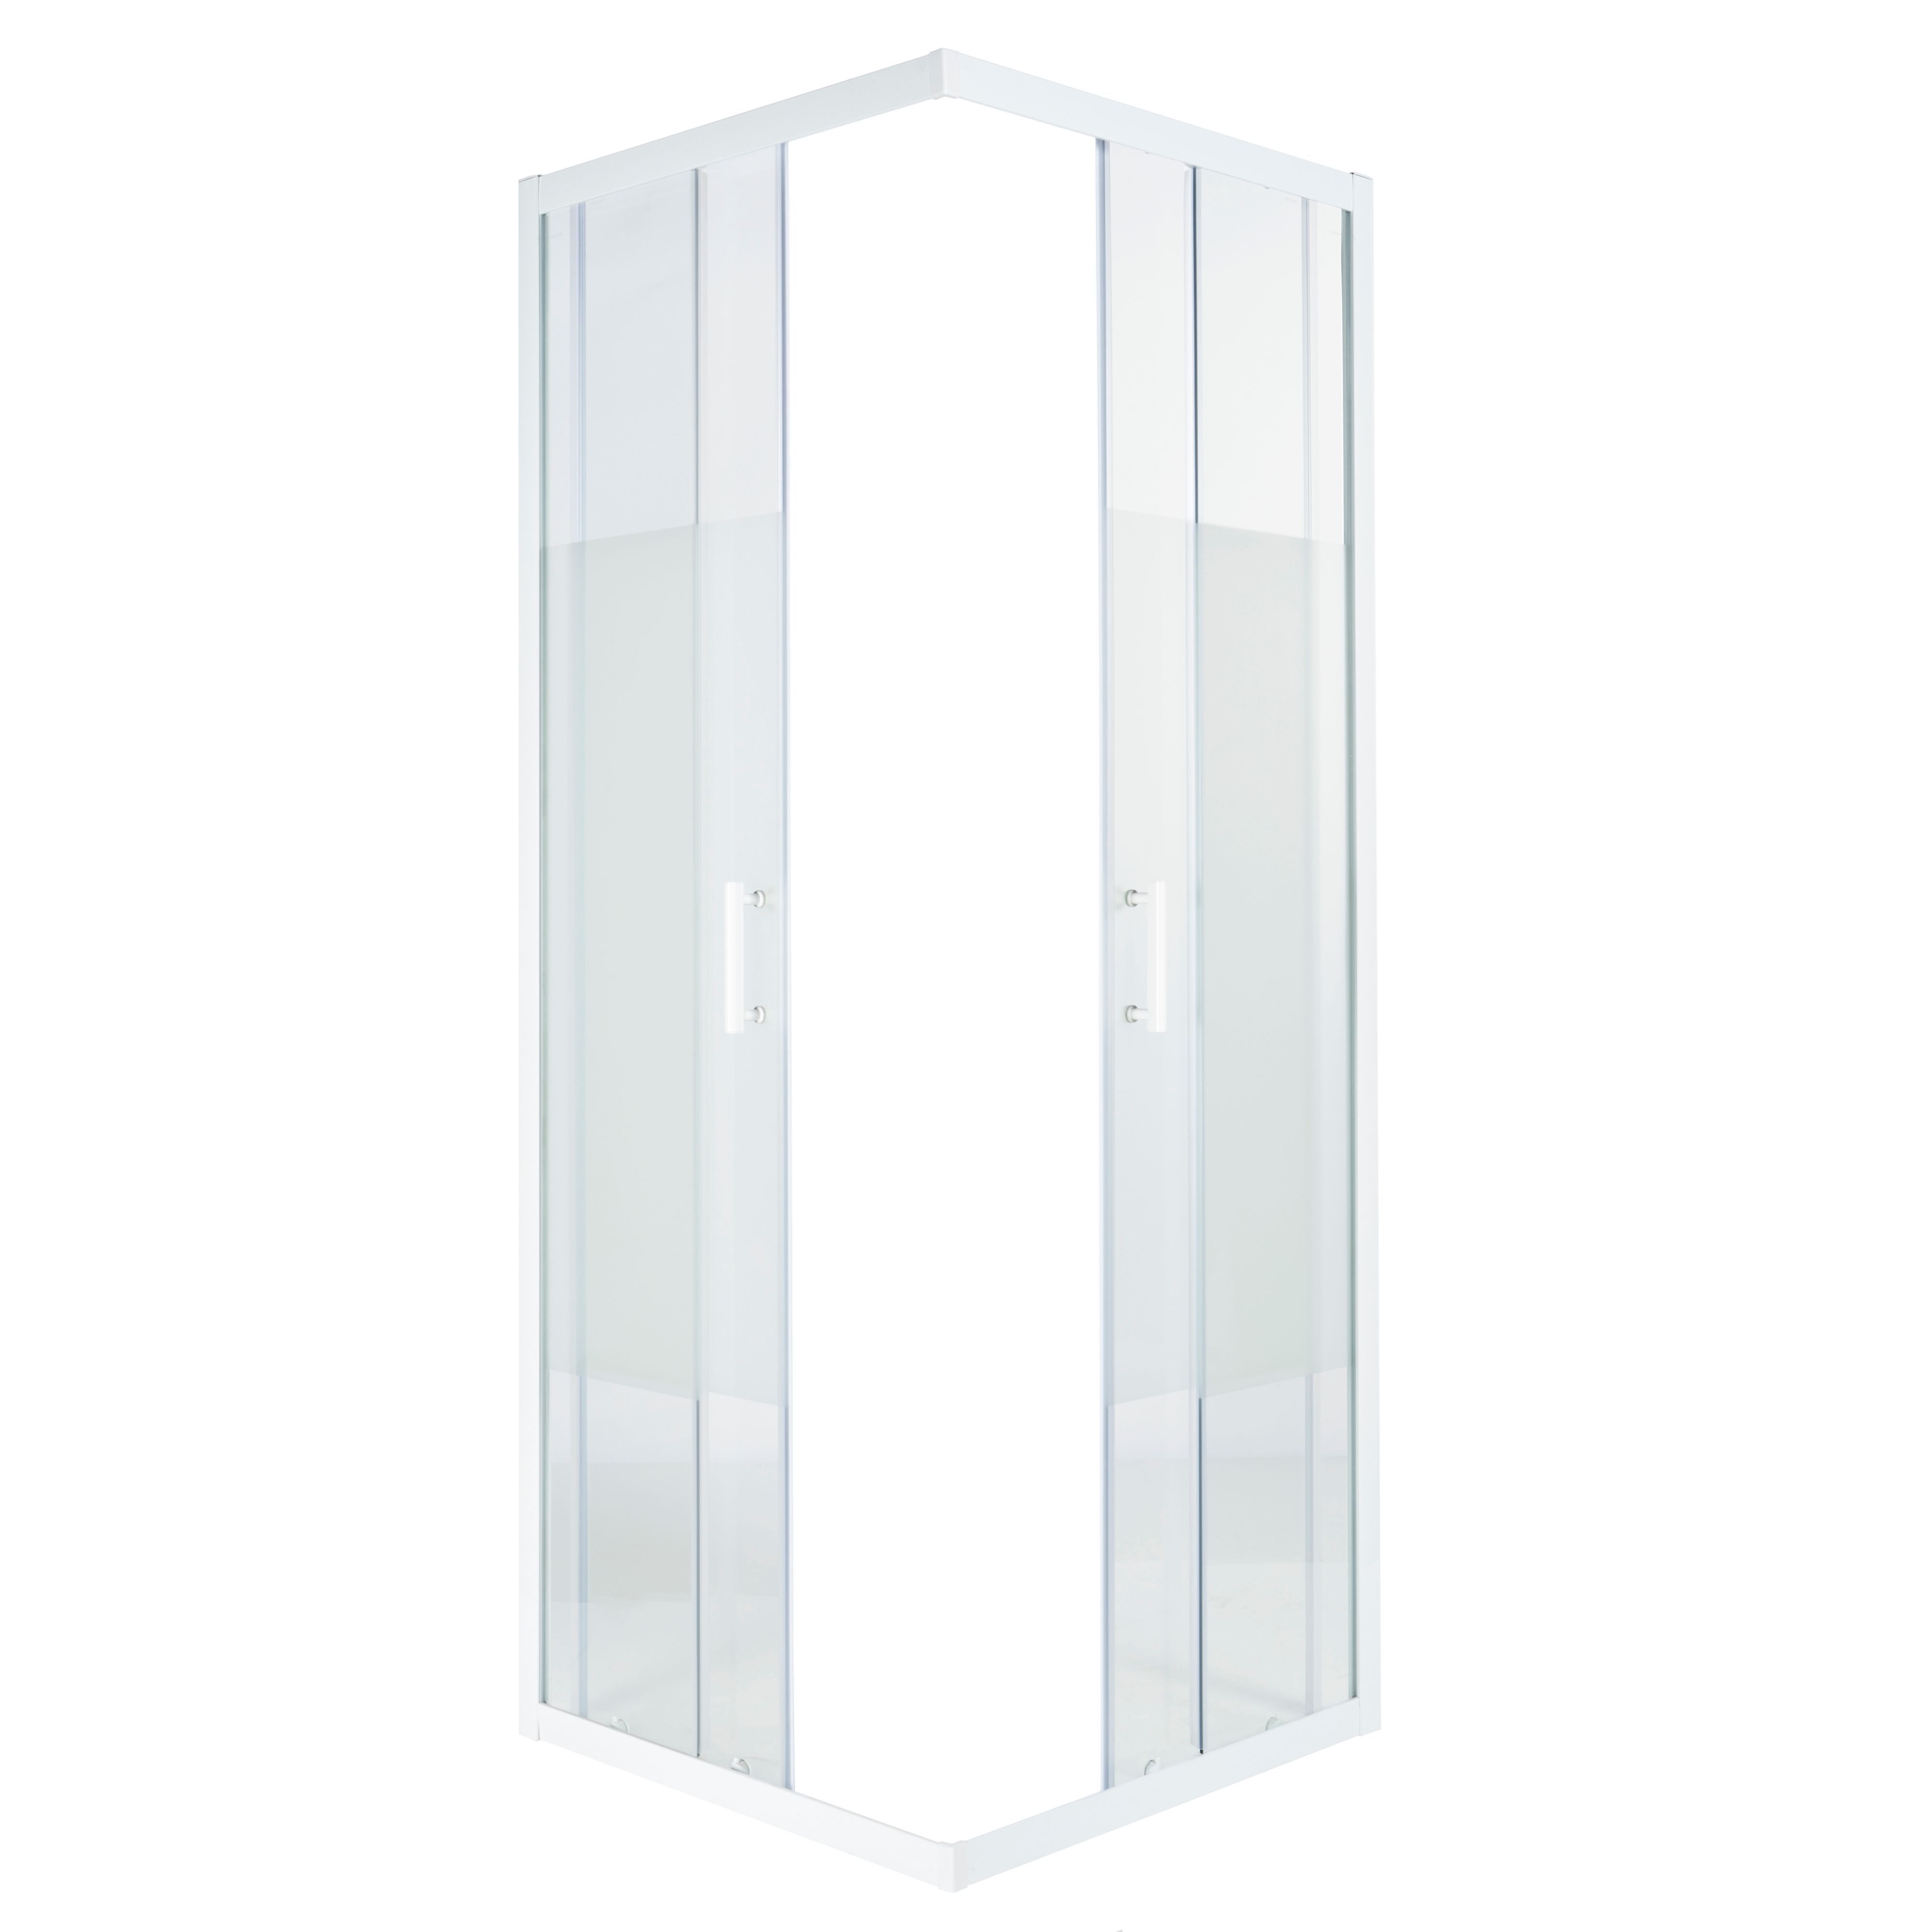 Cooke & Lewis Onega Frosted Universal Square Shower enclosure with Corner entry double sliding door (W)76cm (D)76cm